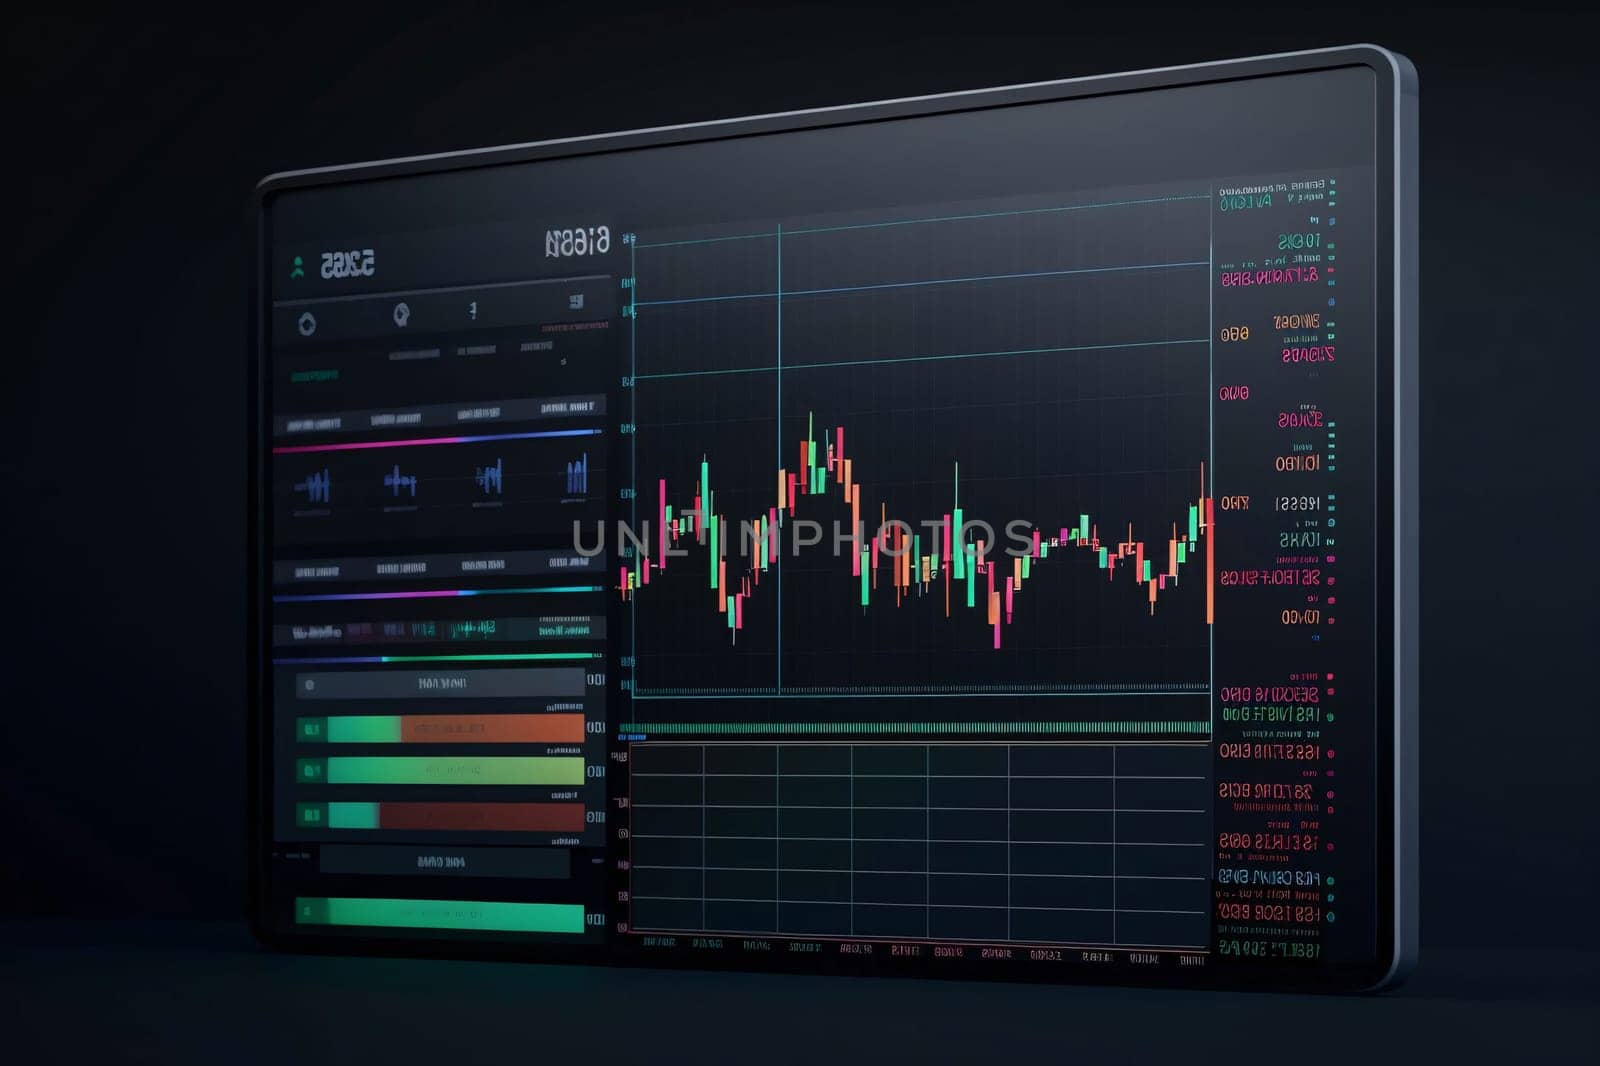 Stock Market: 3d rendering of a computer screen with stock market data on it